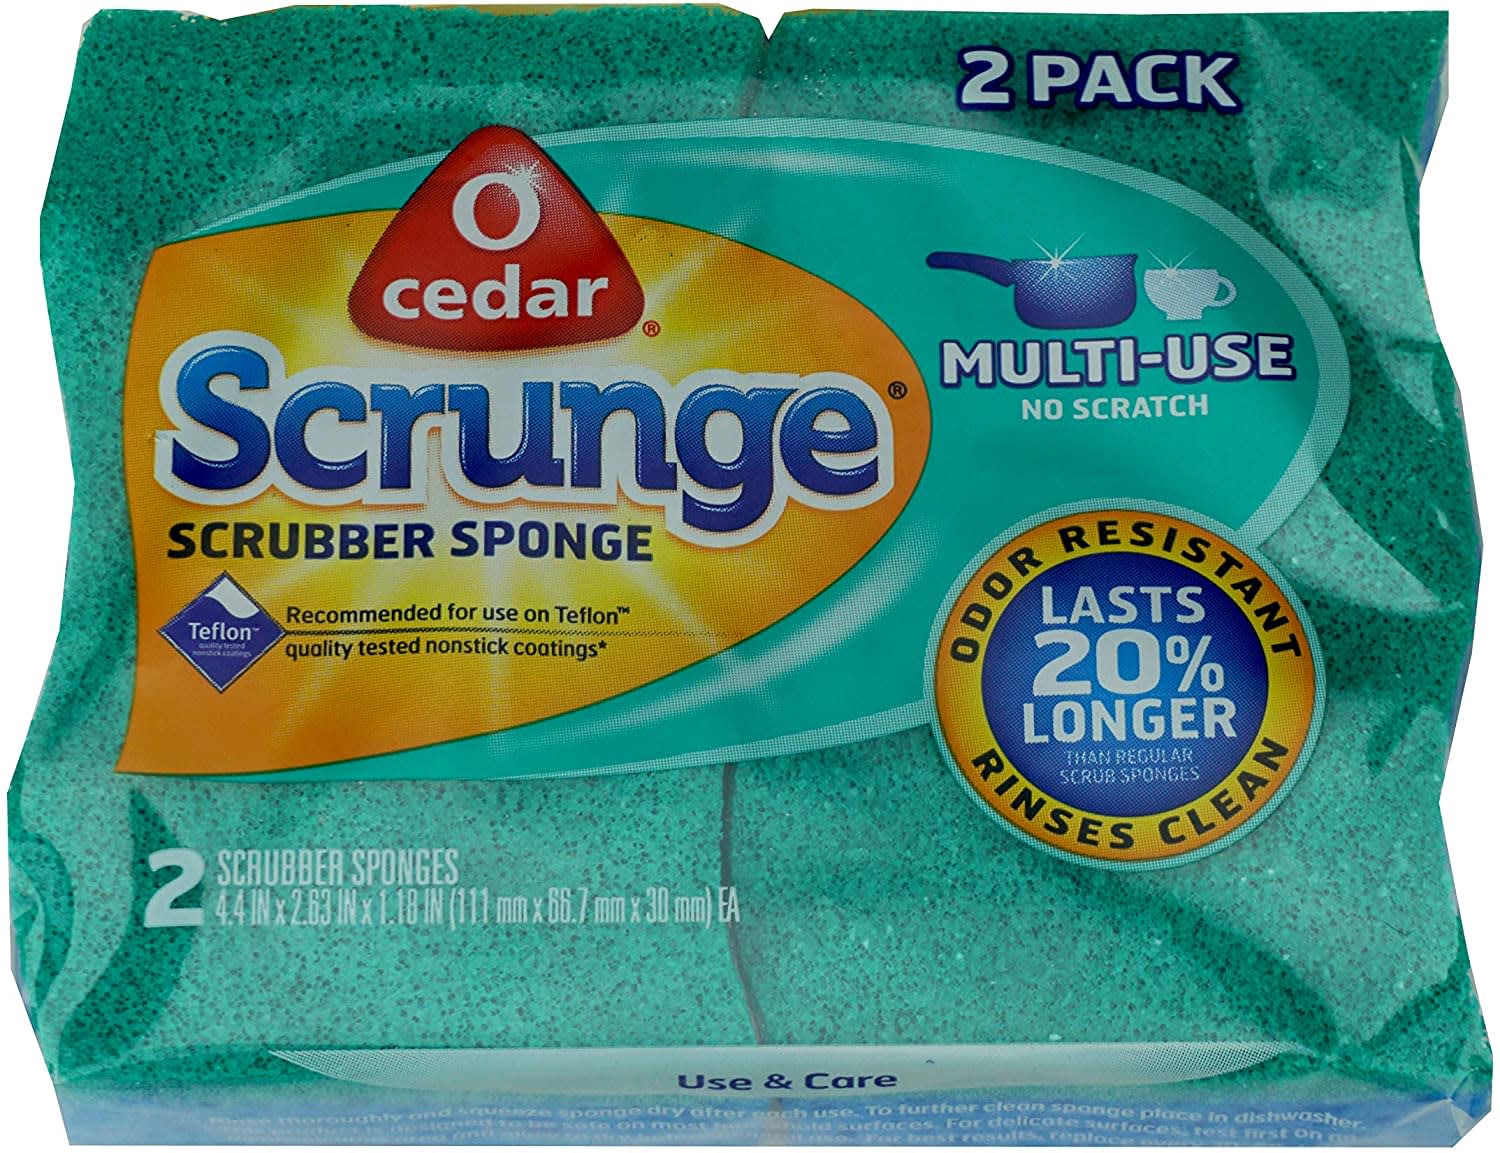 Does it Work? We Tested a Silicone Scrubber Sponge